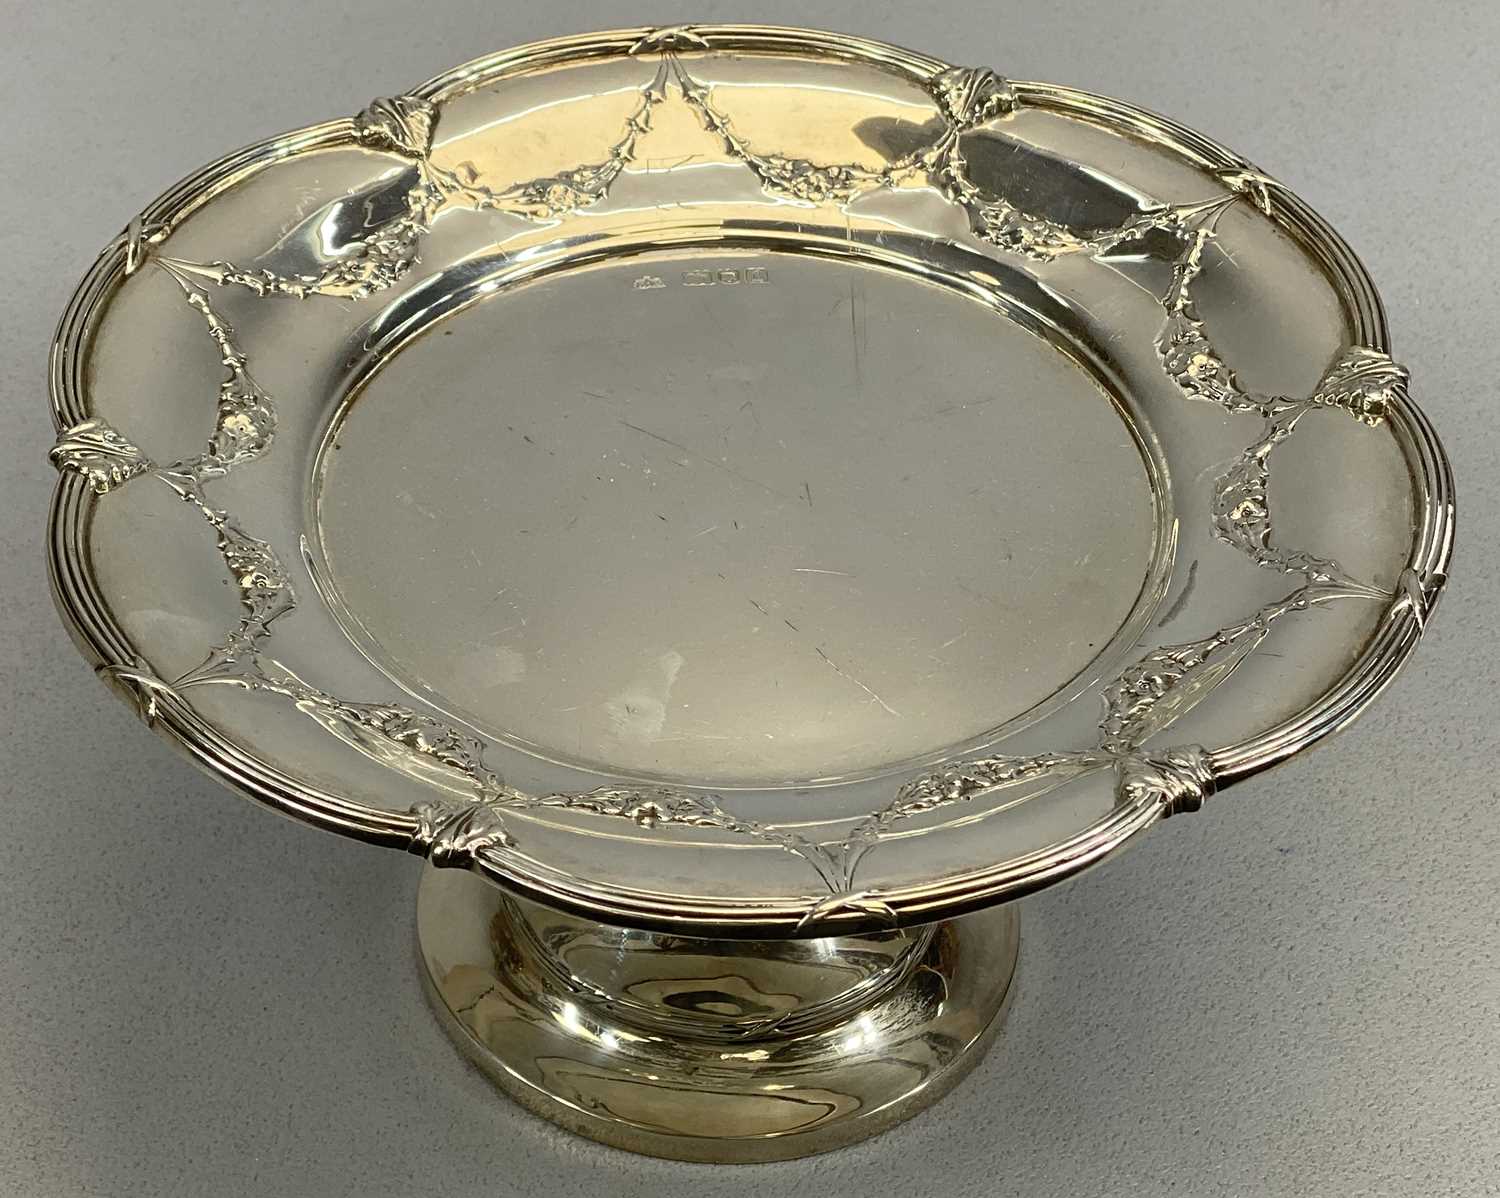 SILVER TAZZA the lobed outer rim with bound reeded details and an inner band of embossed floral - Image 3 of 4